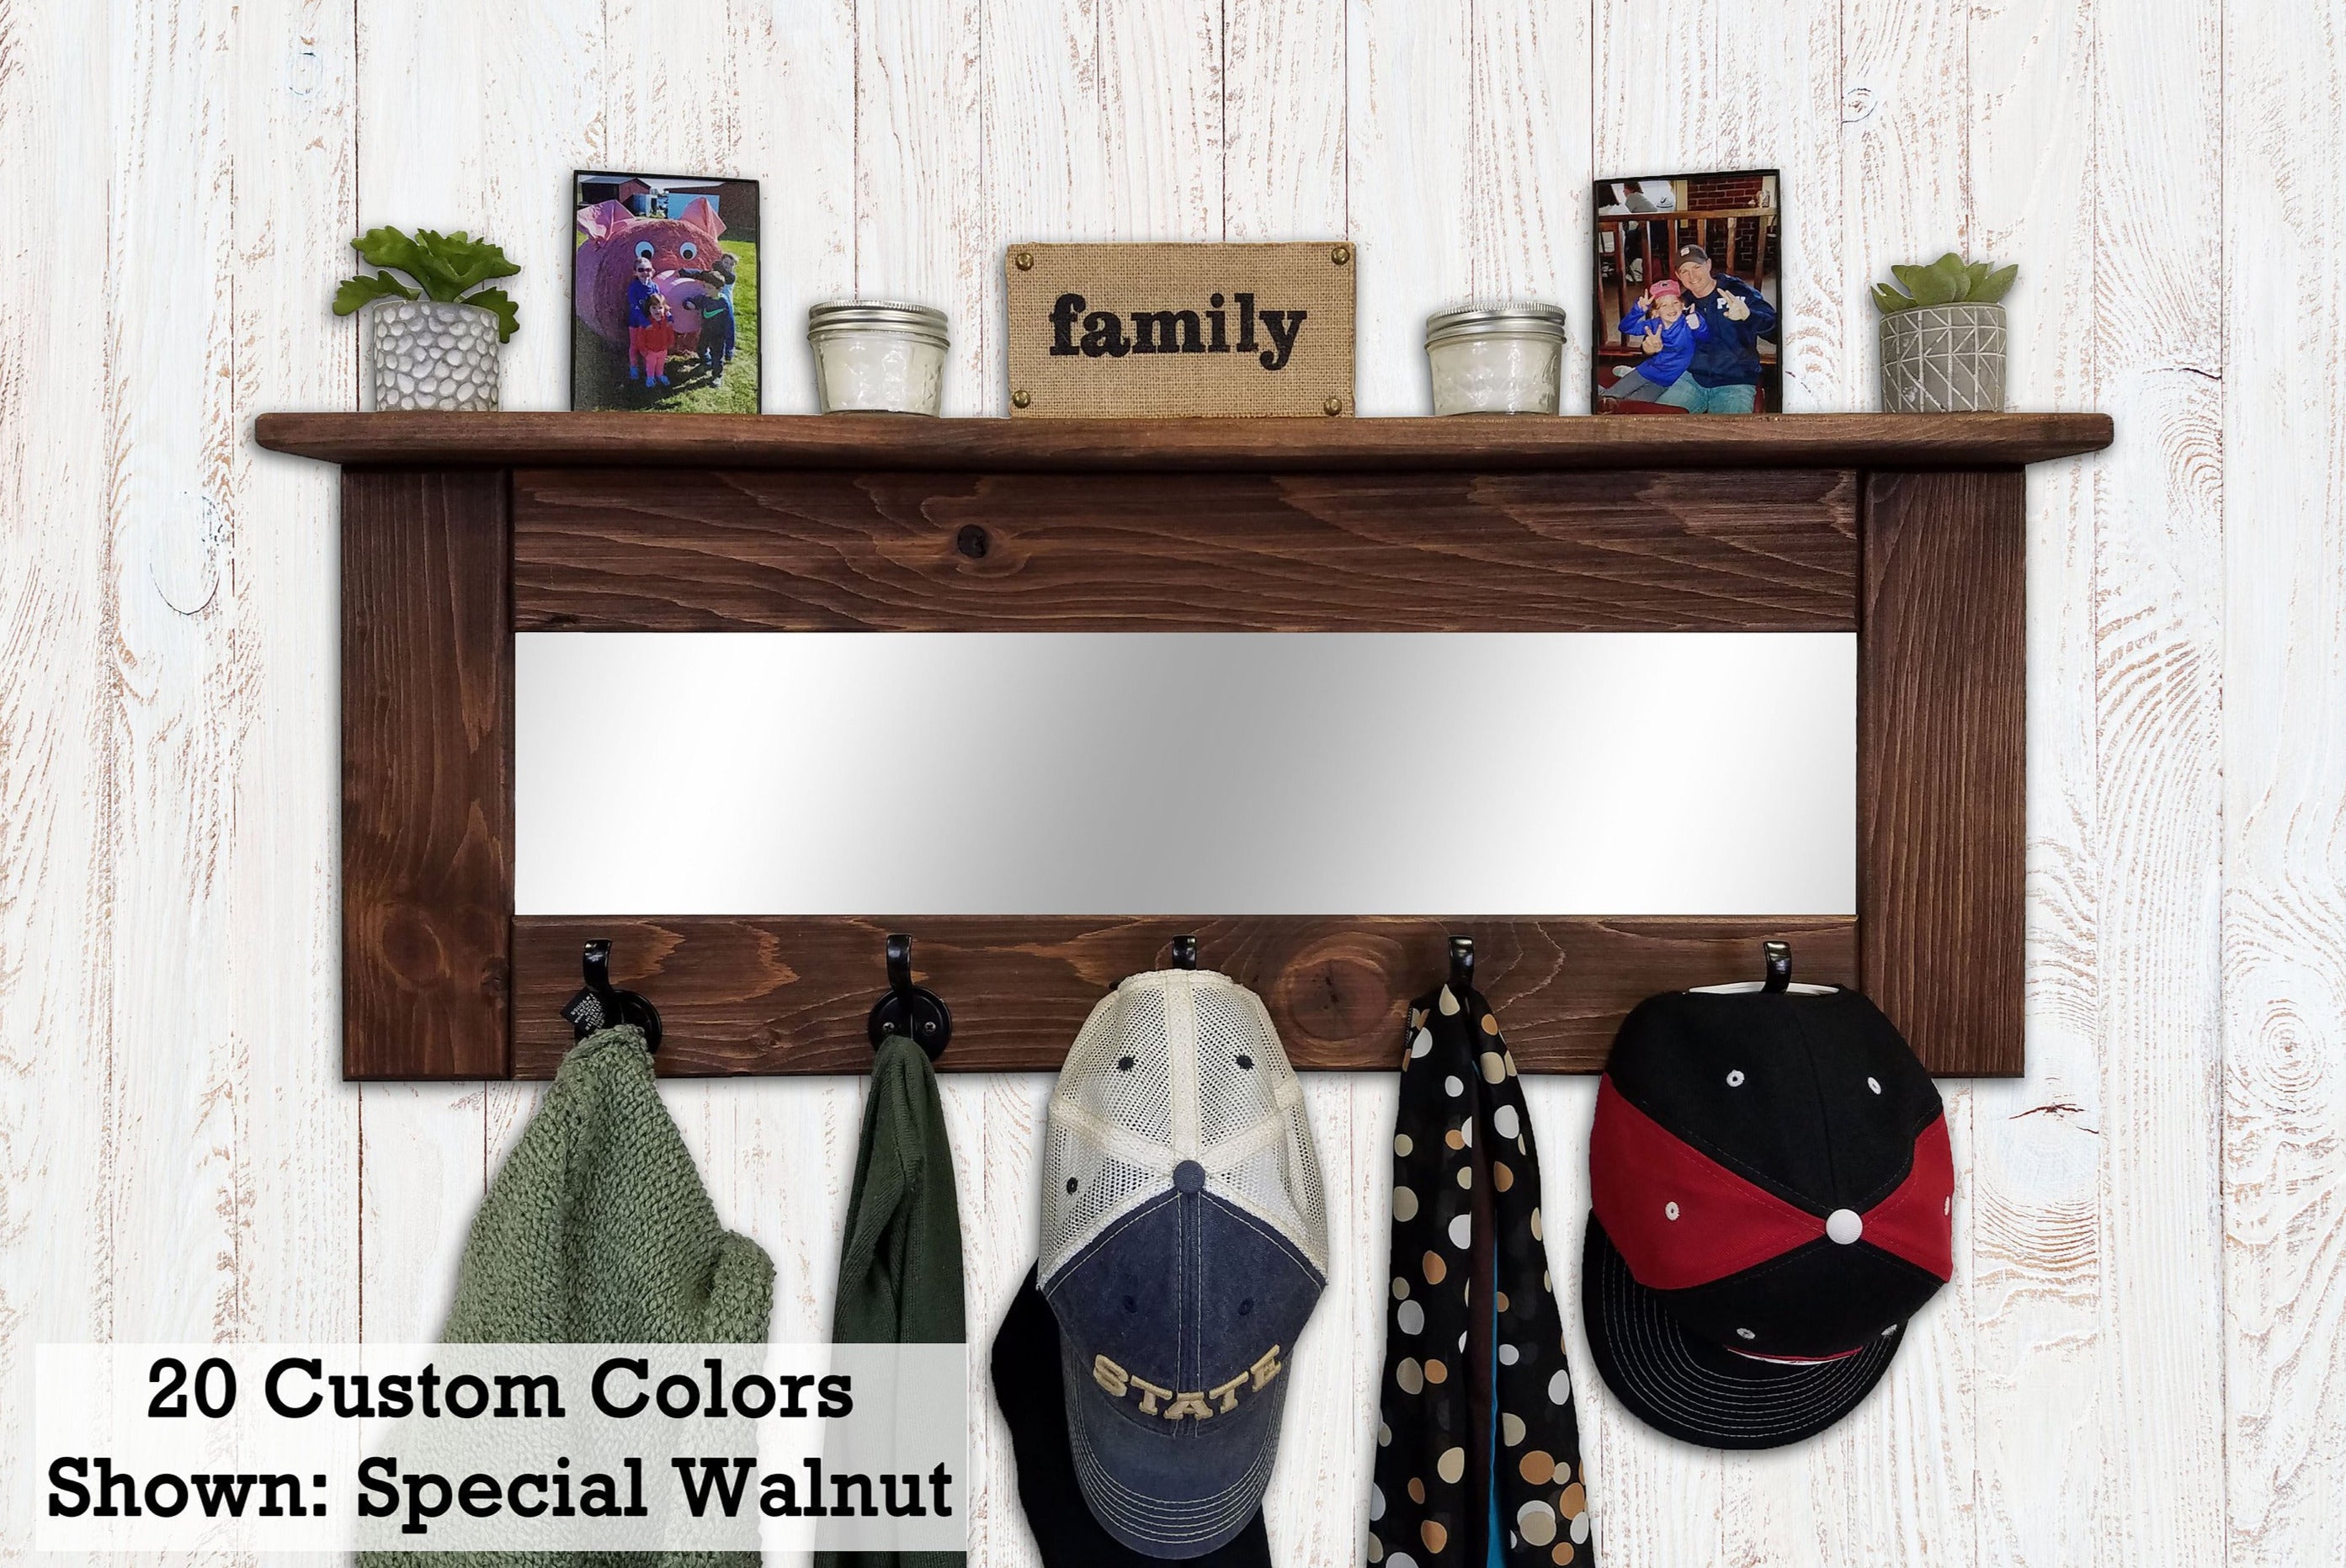 Painted White Entryway Coat Rack and Shelf